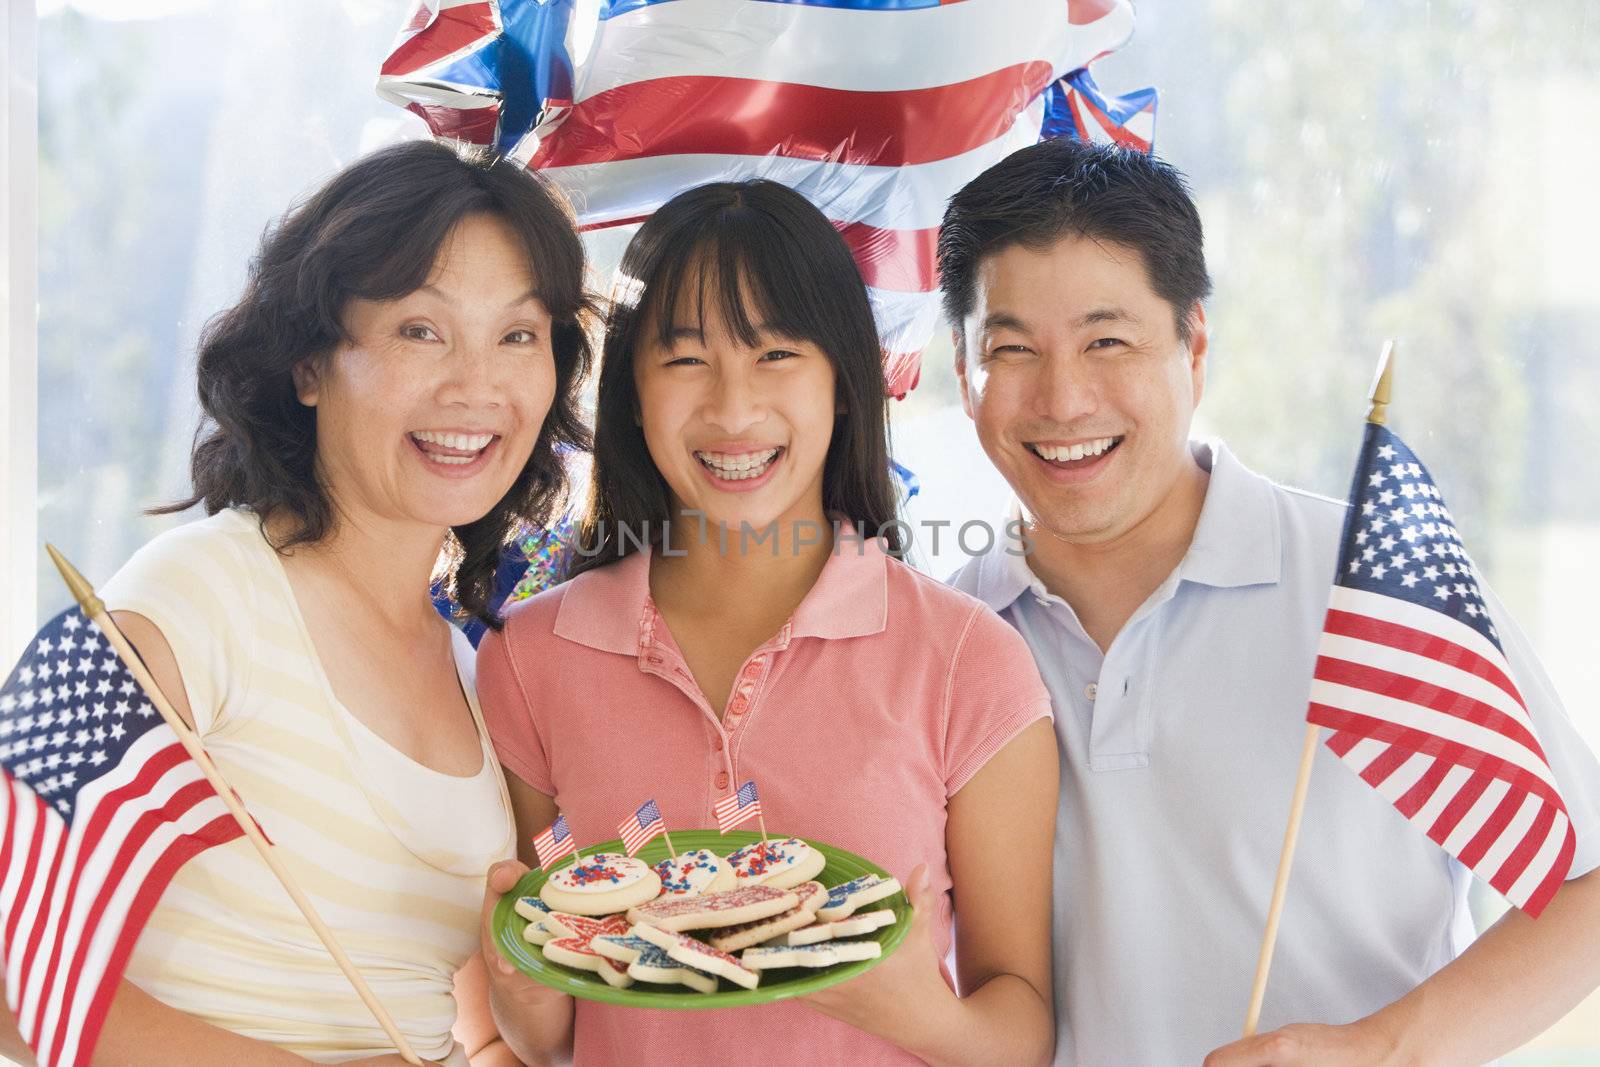 Family outdoors on fourth of July with flags and cookies smiling by MonkeyBusiness